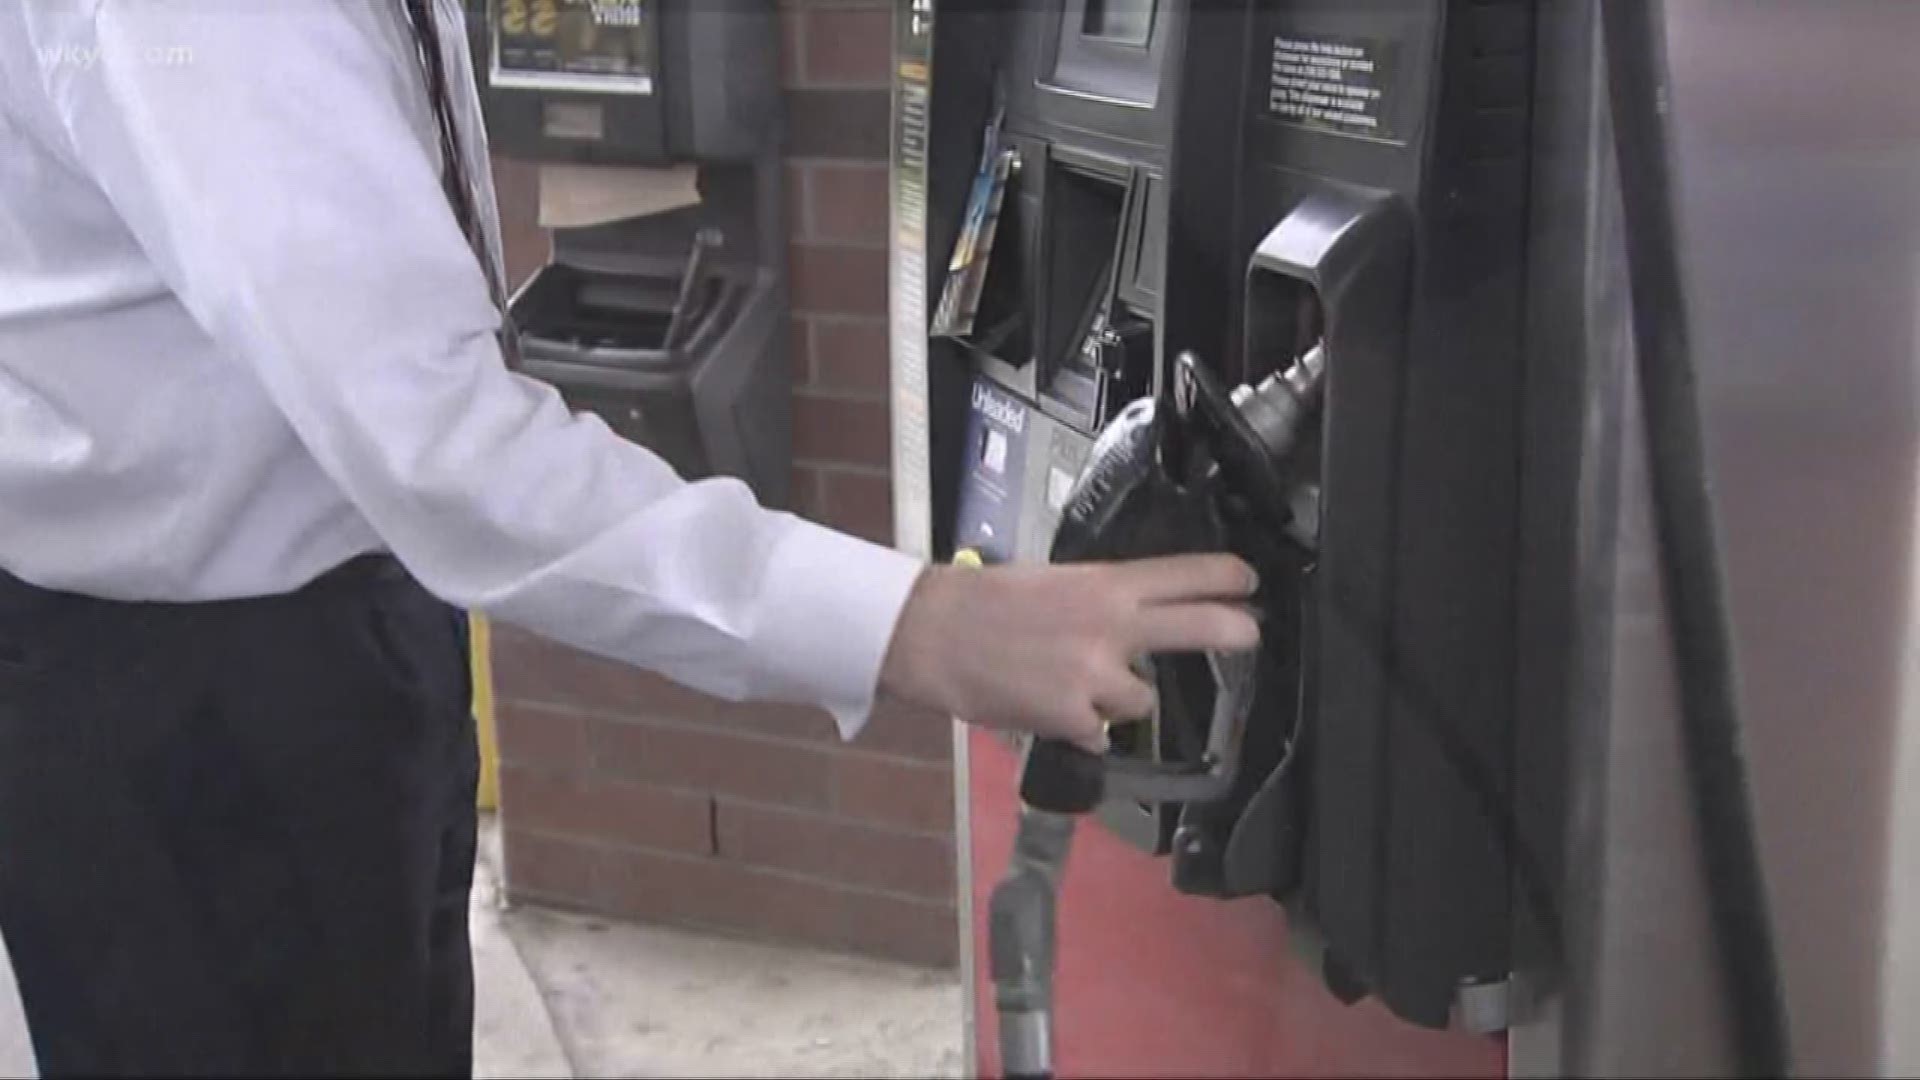 Get ready. Gas prices are about to go up.
The new statewide gas tax goes into effect on Monday -- another ten cents per gallon.